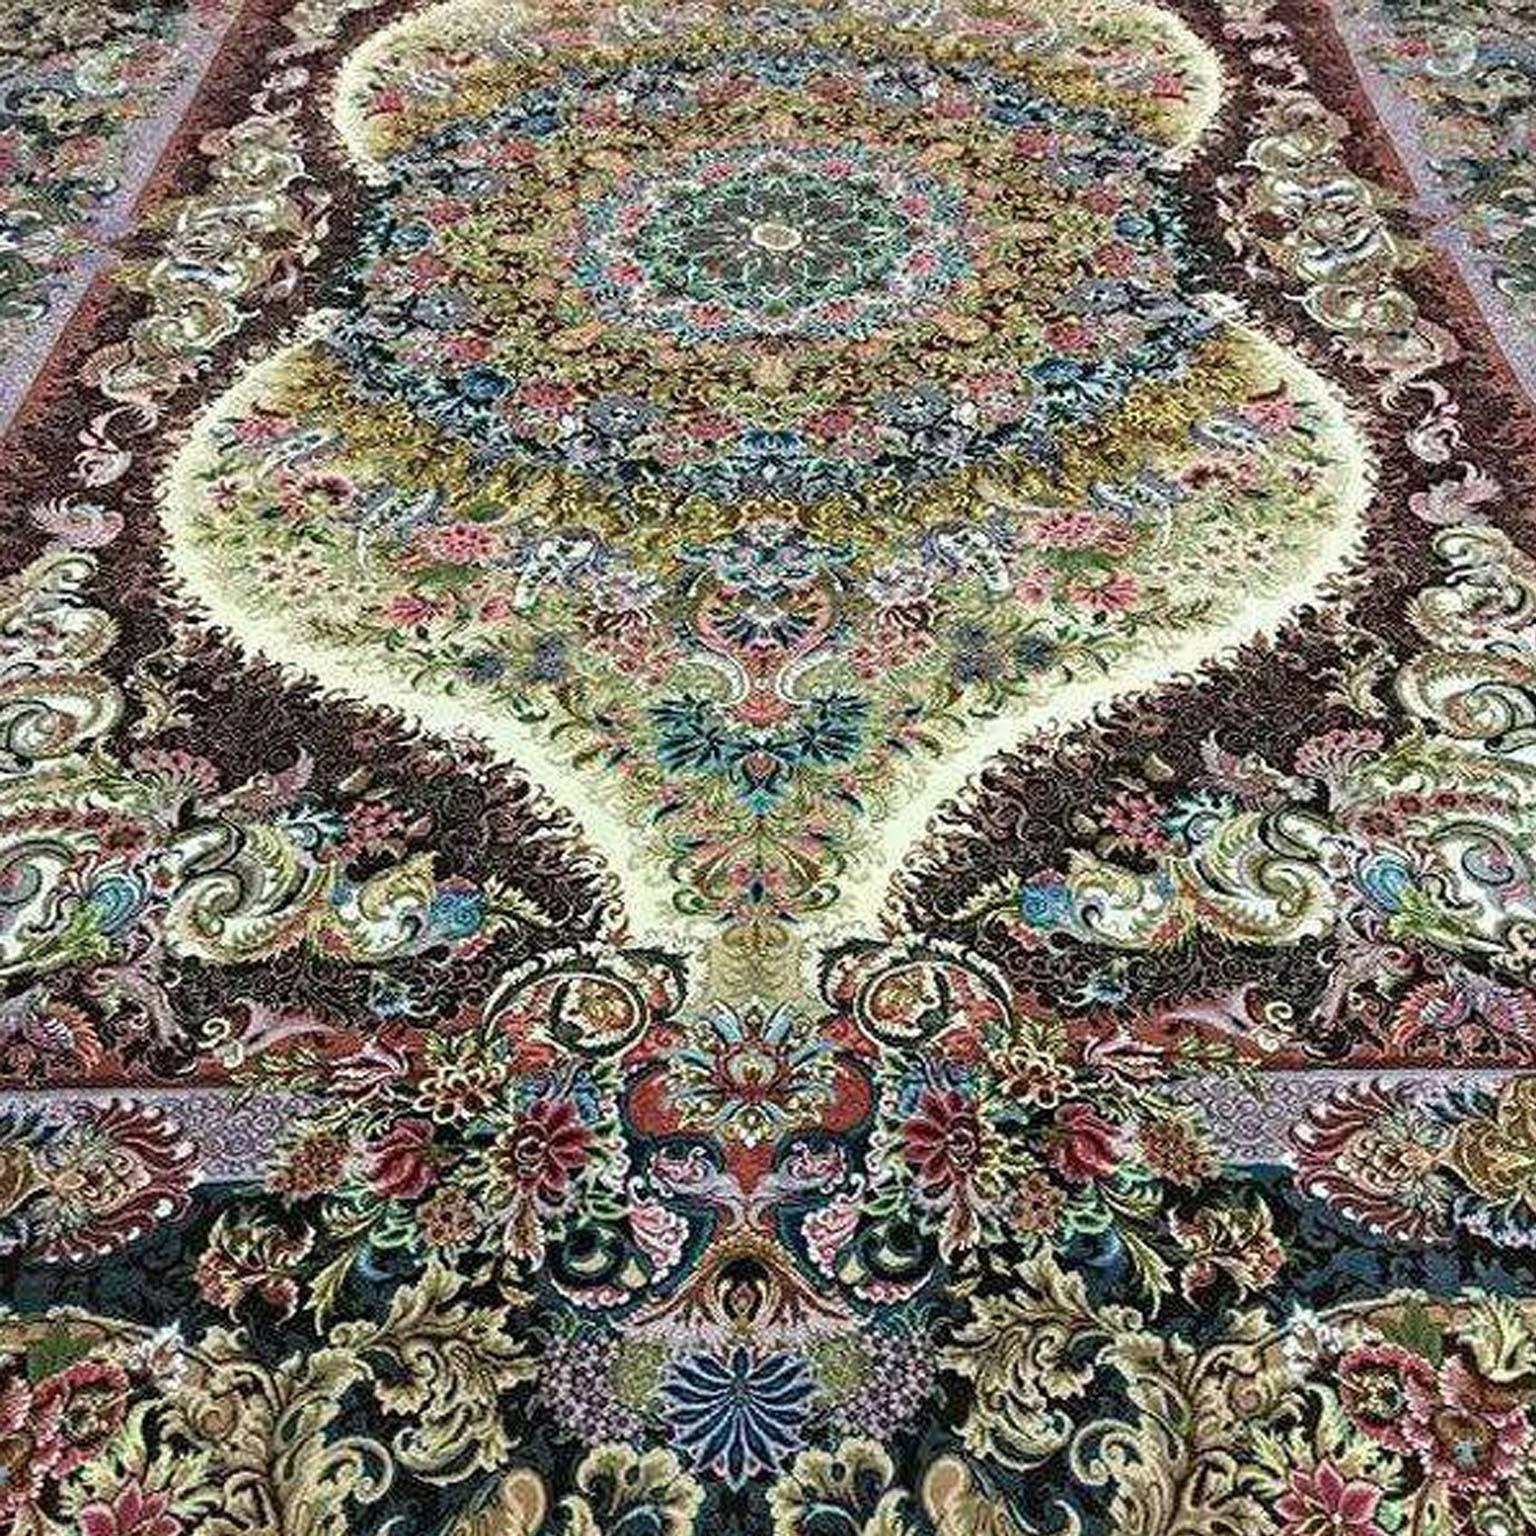 KPSI: 556
Origin: Tabriz, Iran
Composition: Silk and wool 
Size: 300 cm x 200 cm
 
When it comes to the carpet industry and the carpet designers, Tabriz city of Iran has always been known as the city of master weavers. This influential